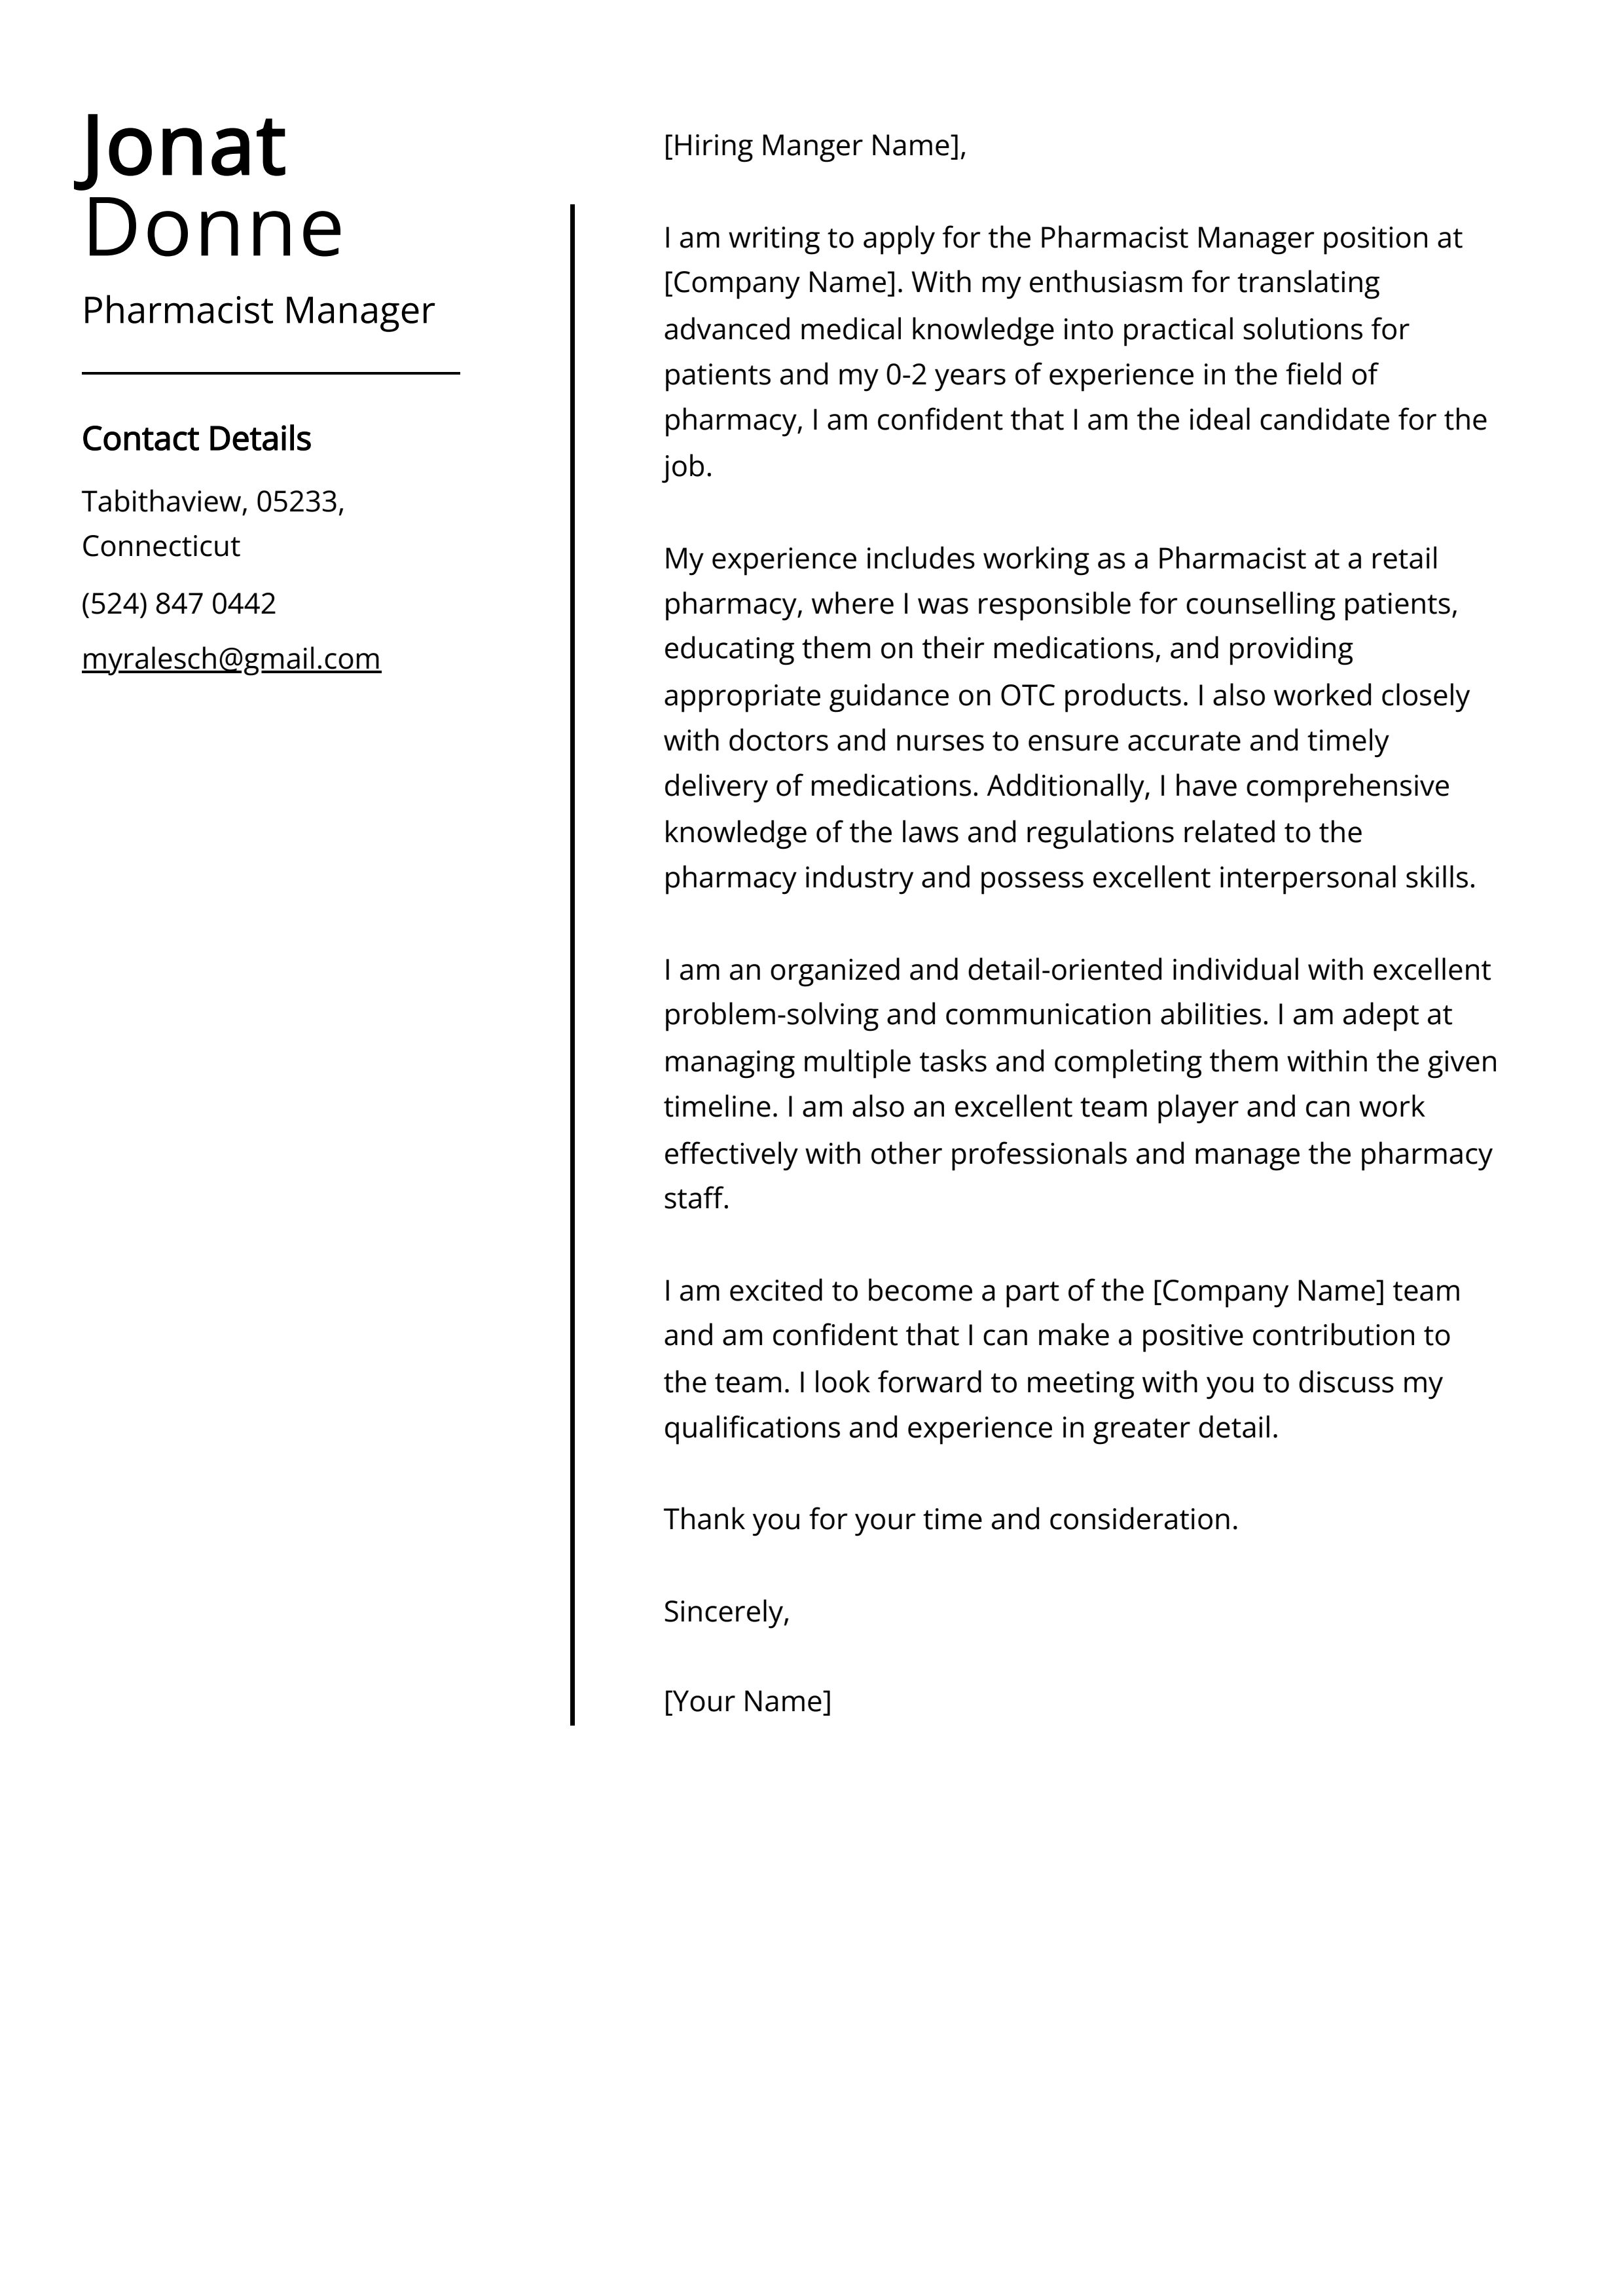 Pharmacist Manager Cover Letter Example